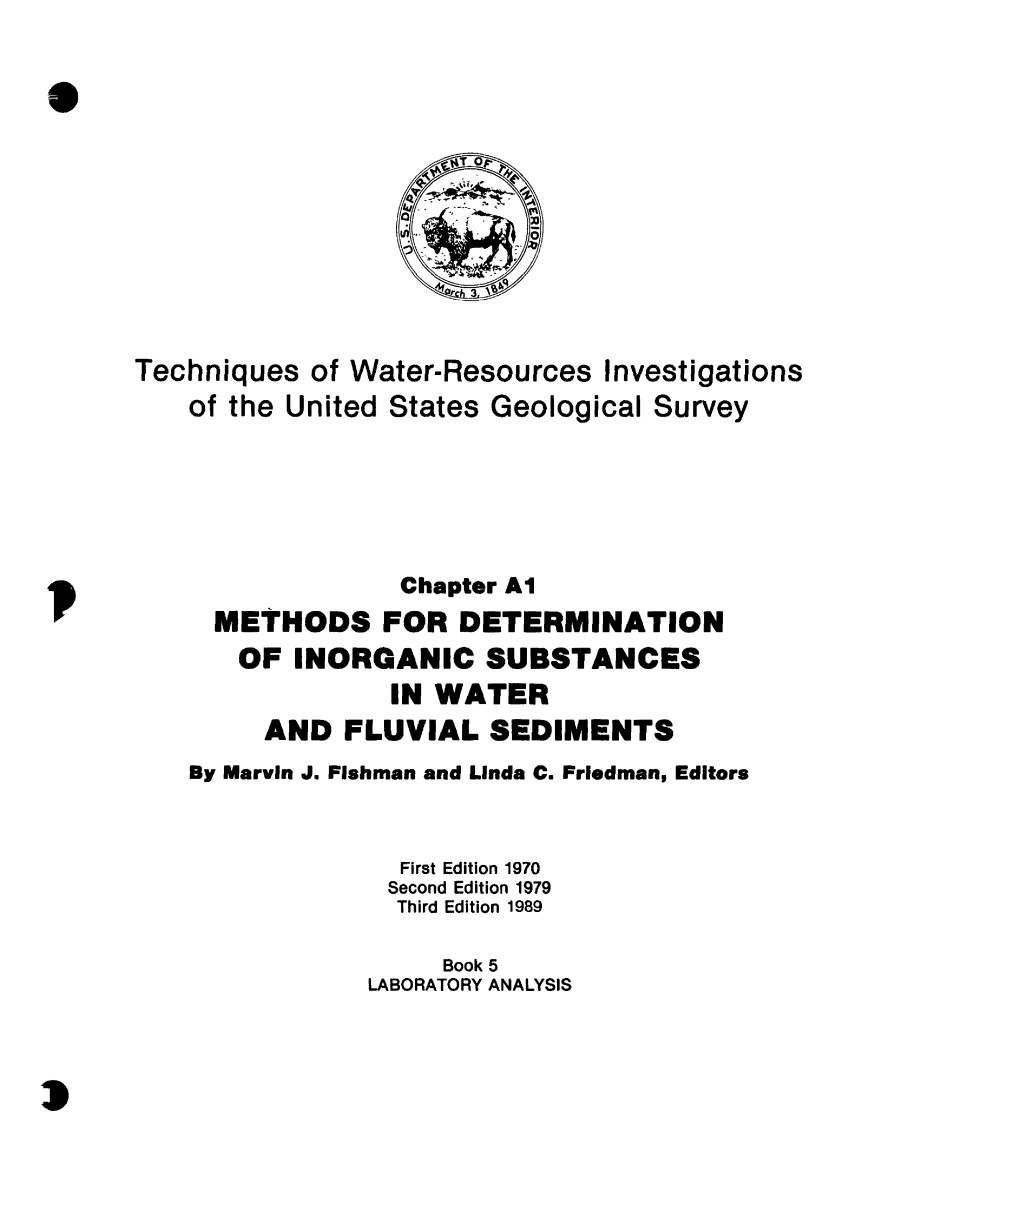 Techniques of Water-Resources Investigations of the United States Geological Survey